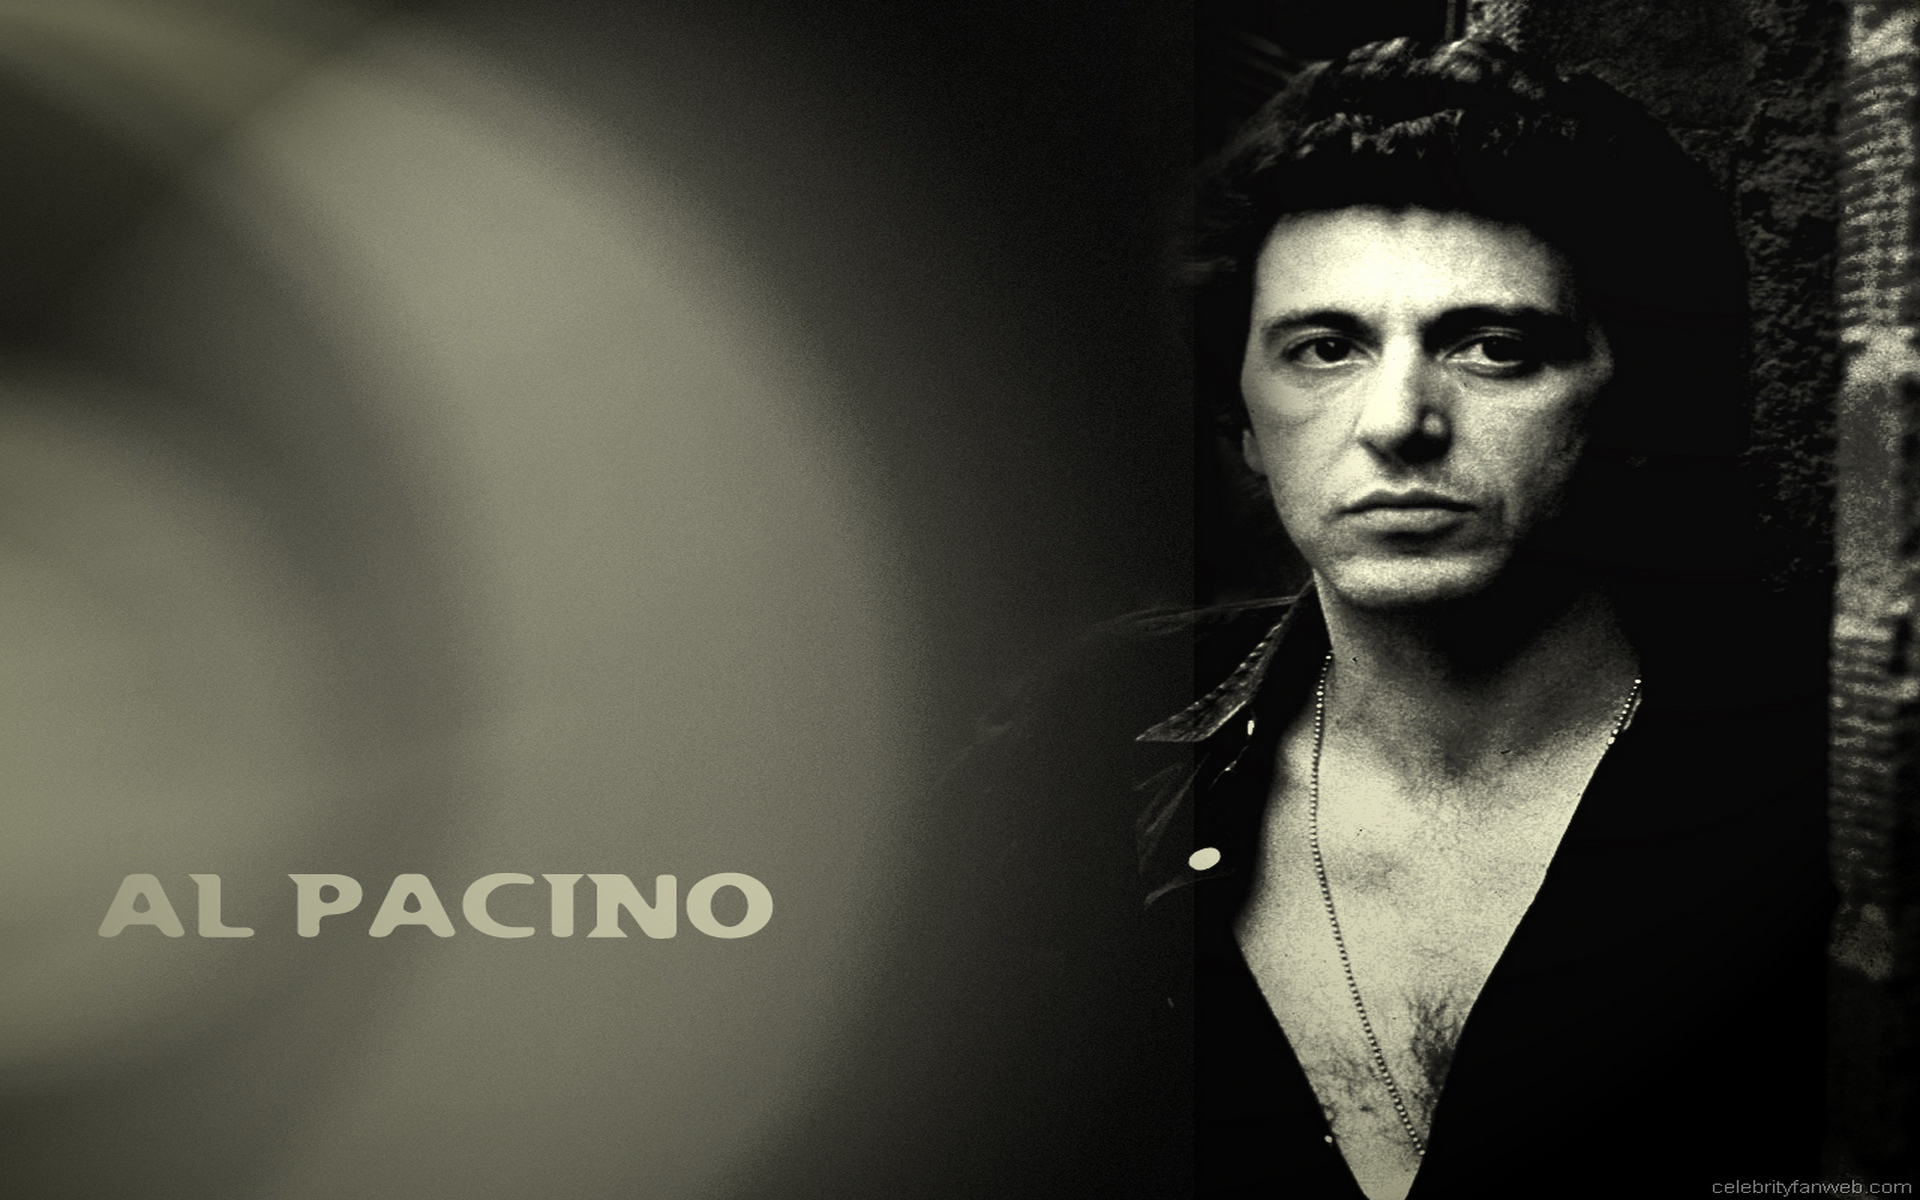 Wallpaper Al Pacino Scarface Pictures